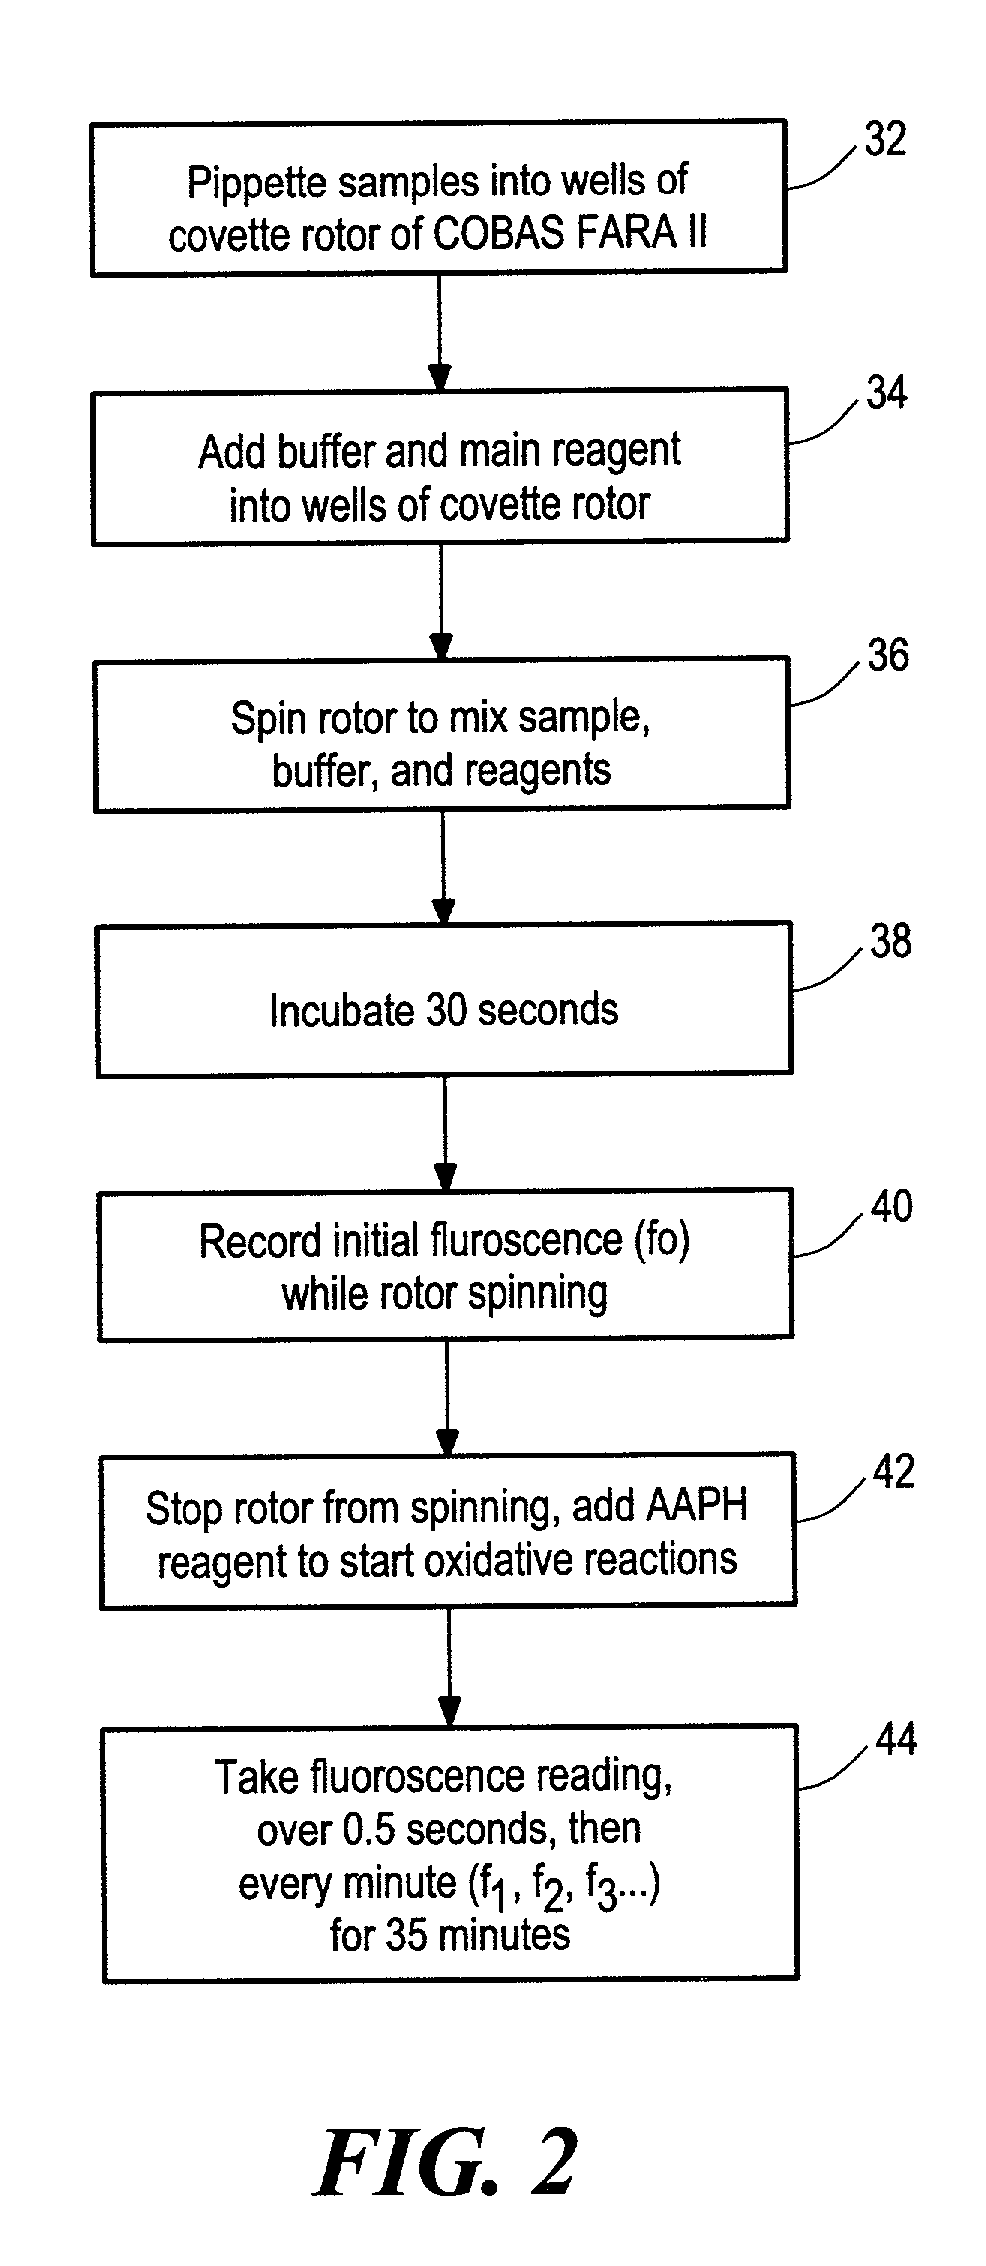 Method for assaying the antioxidant capacity of a sample